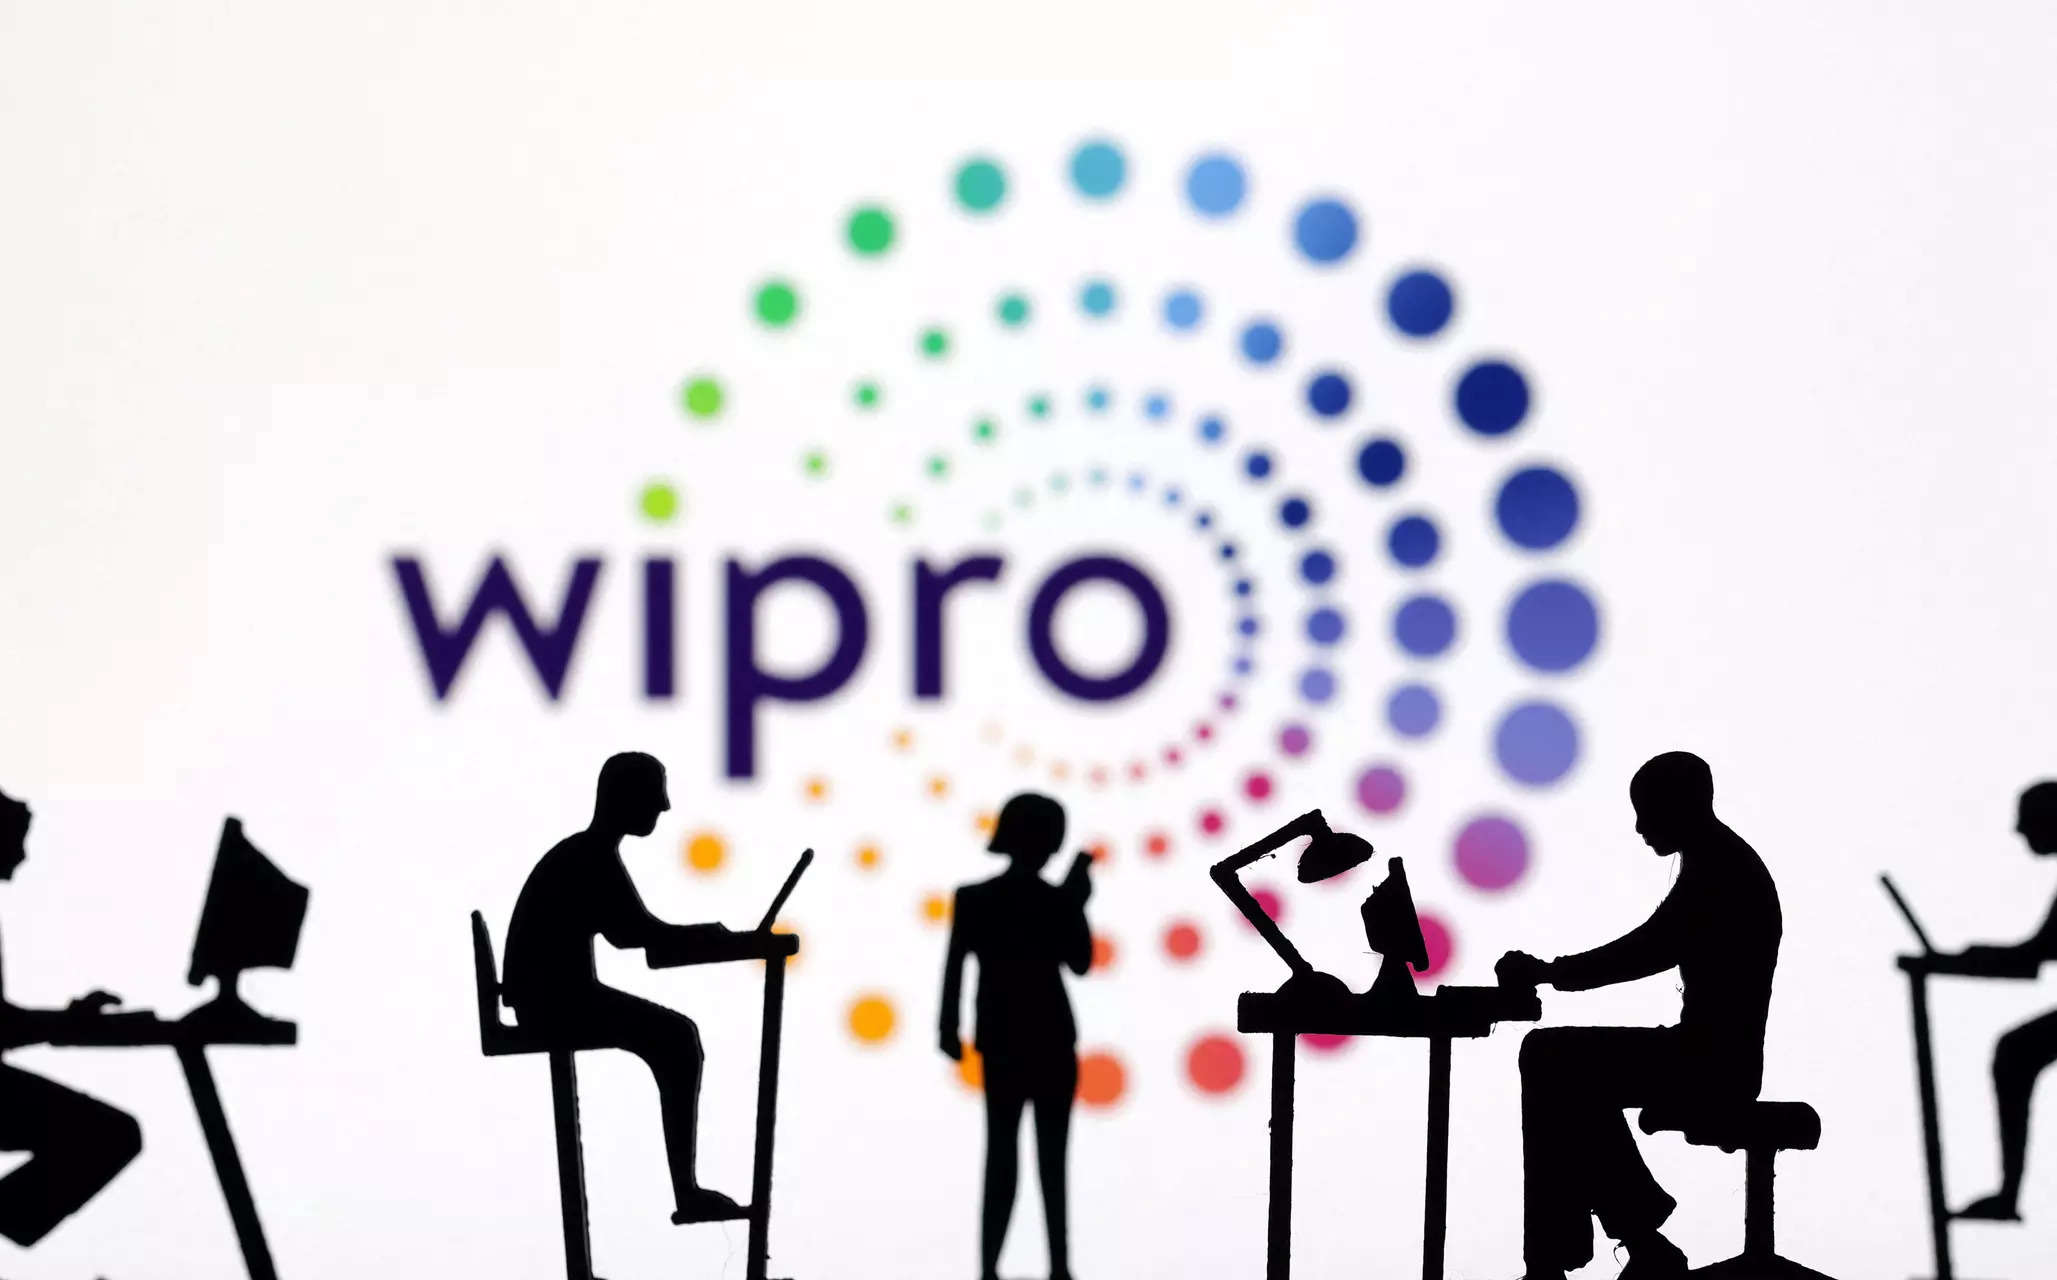 Stock Radar: Wipro has taken support above 16-year rising trendline; time to accumulate or book profits? 